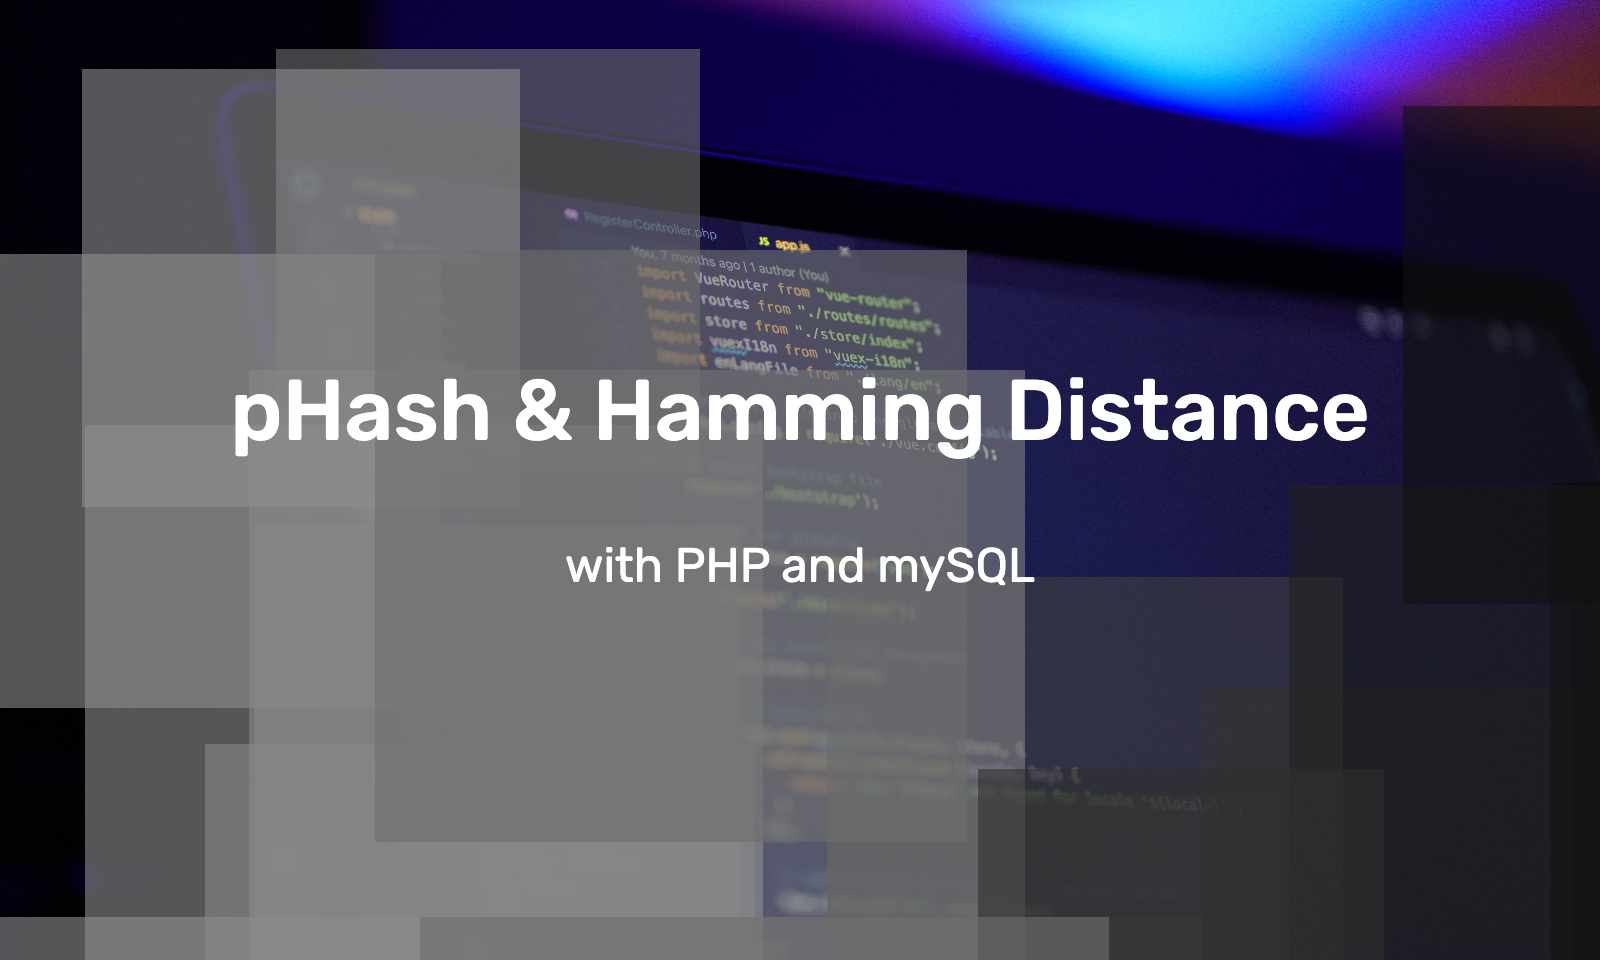 Hamming distance and pHash with PHP and mySQL